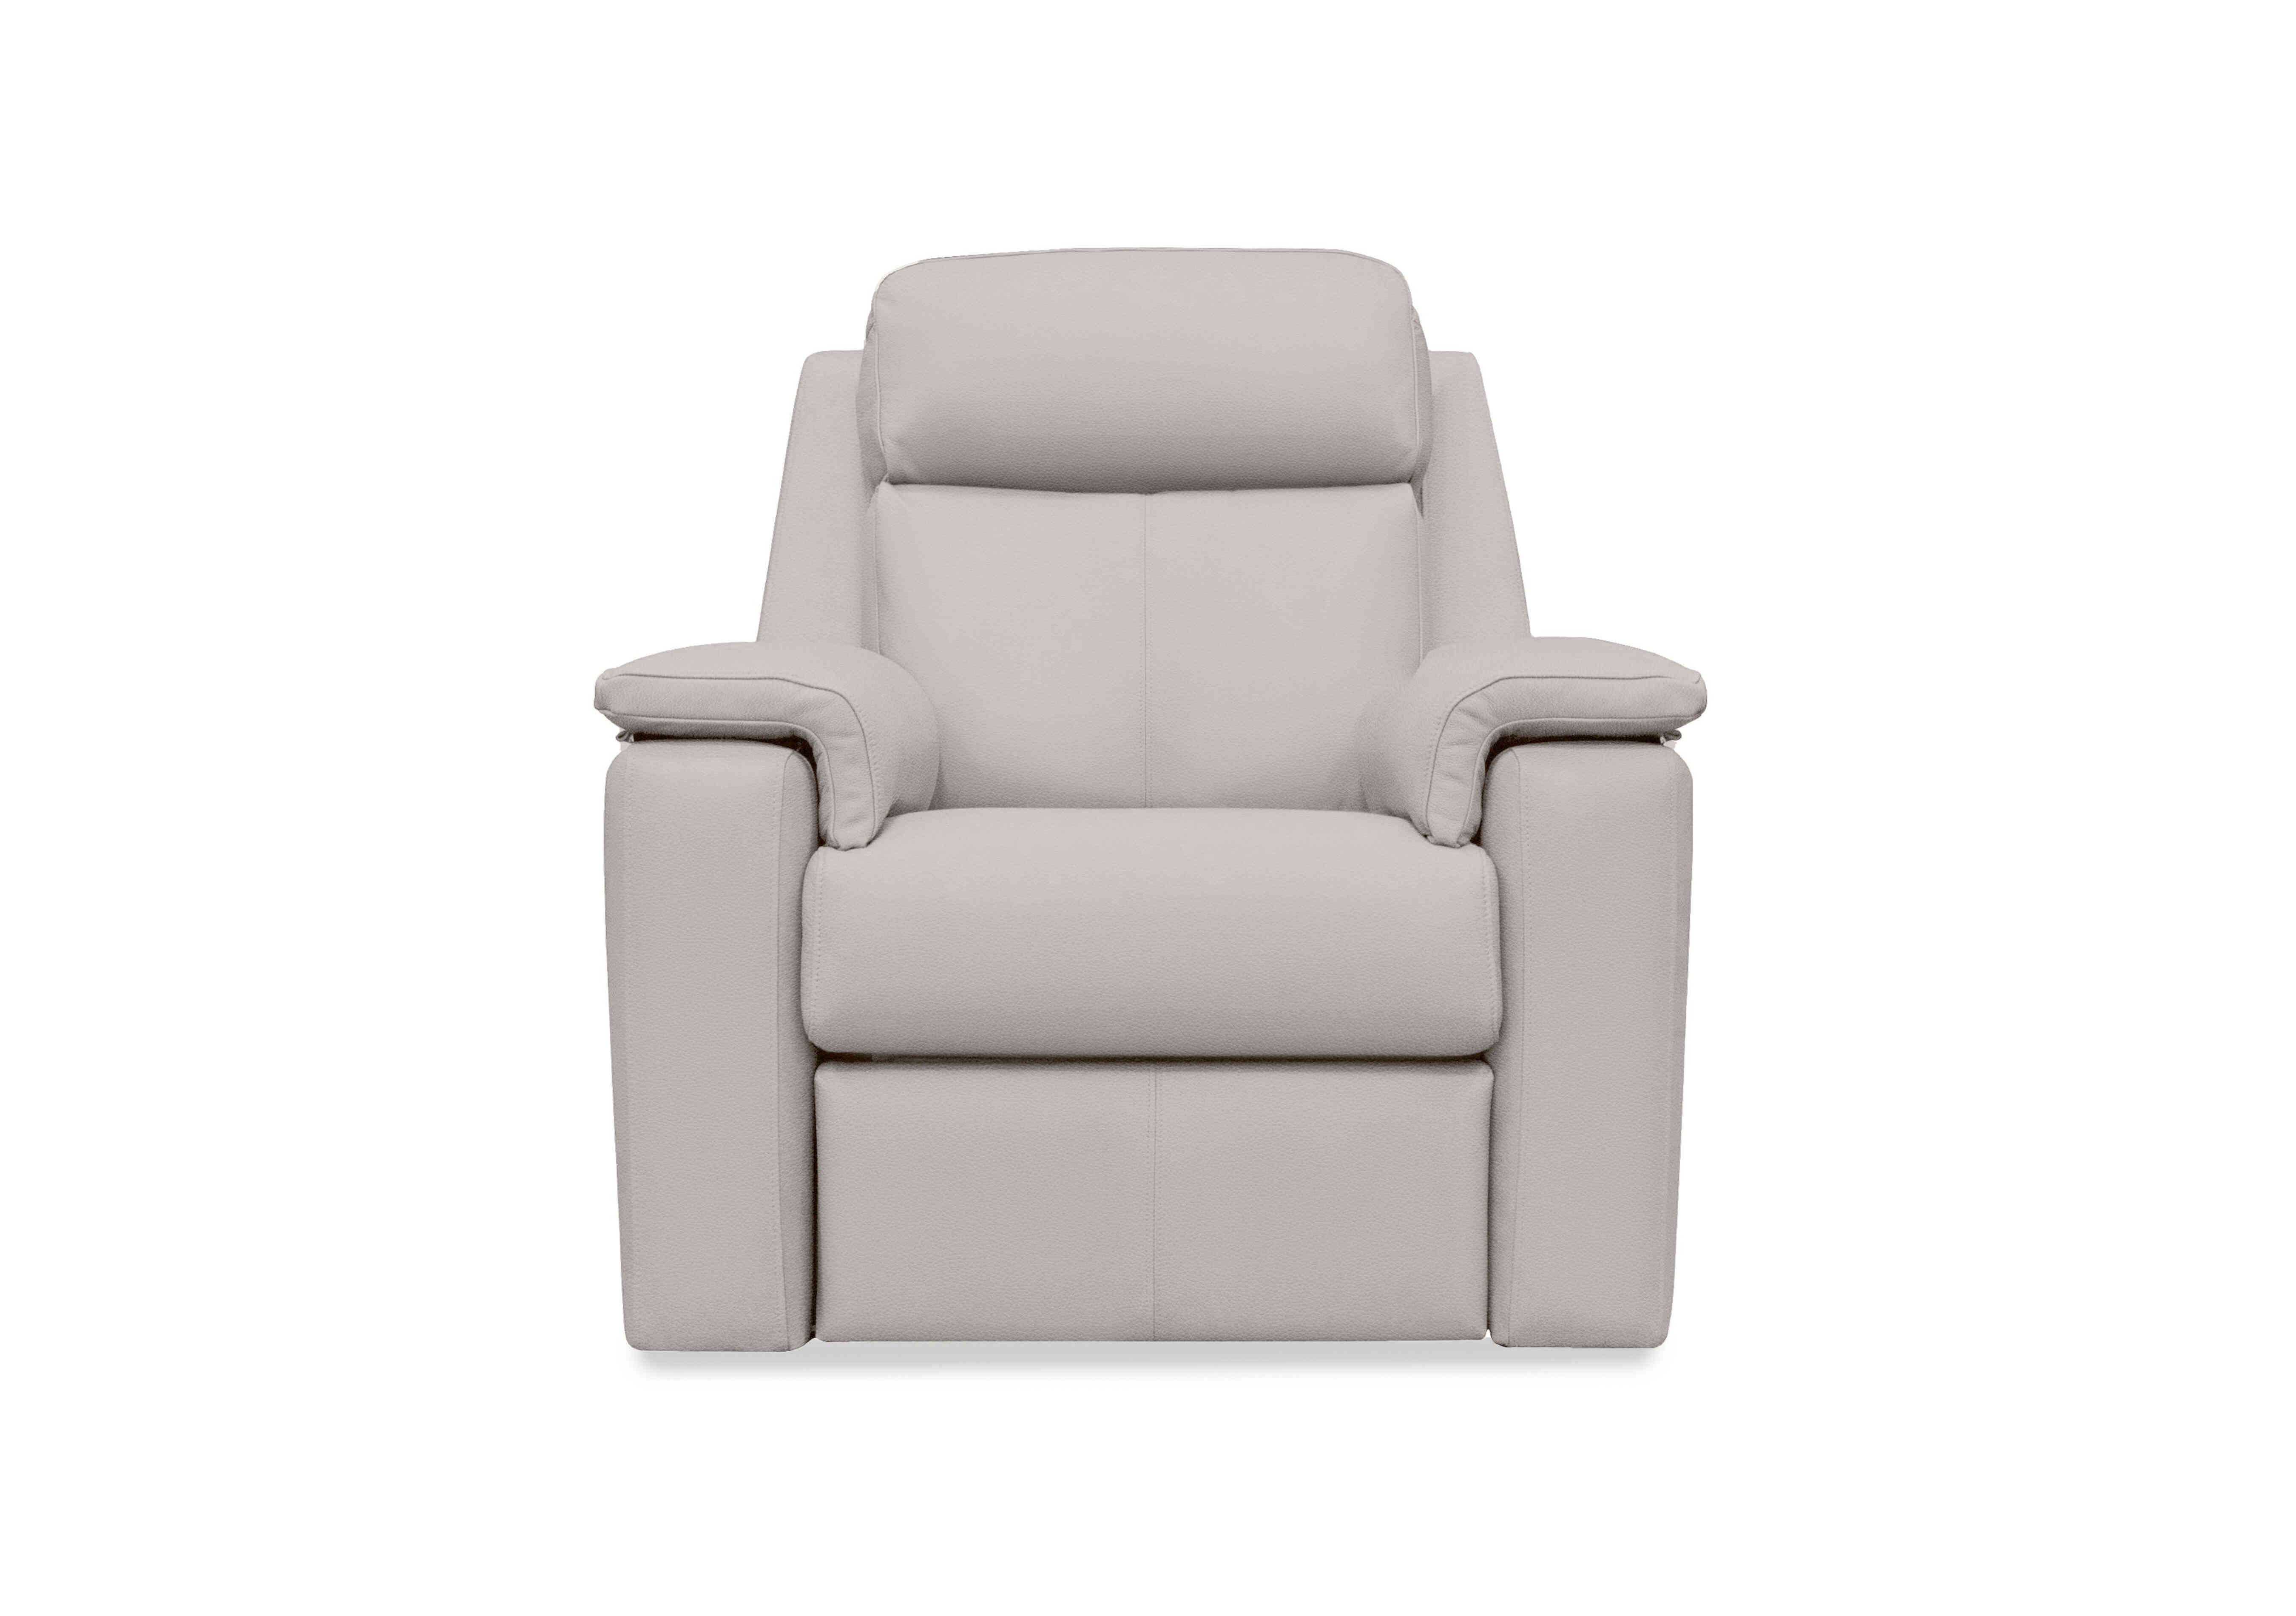 Thornbury Leather Power Recliner Chair with Power Headrest and Power Lumbar in L840 Cambridge Chalk on Furniture Village